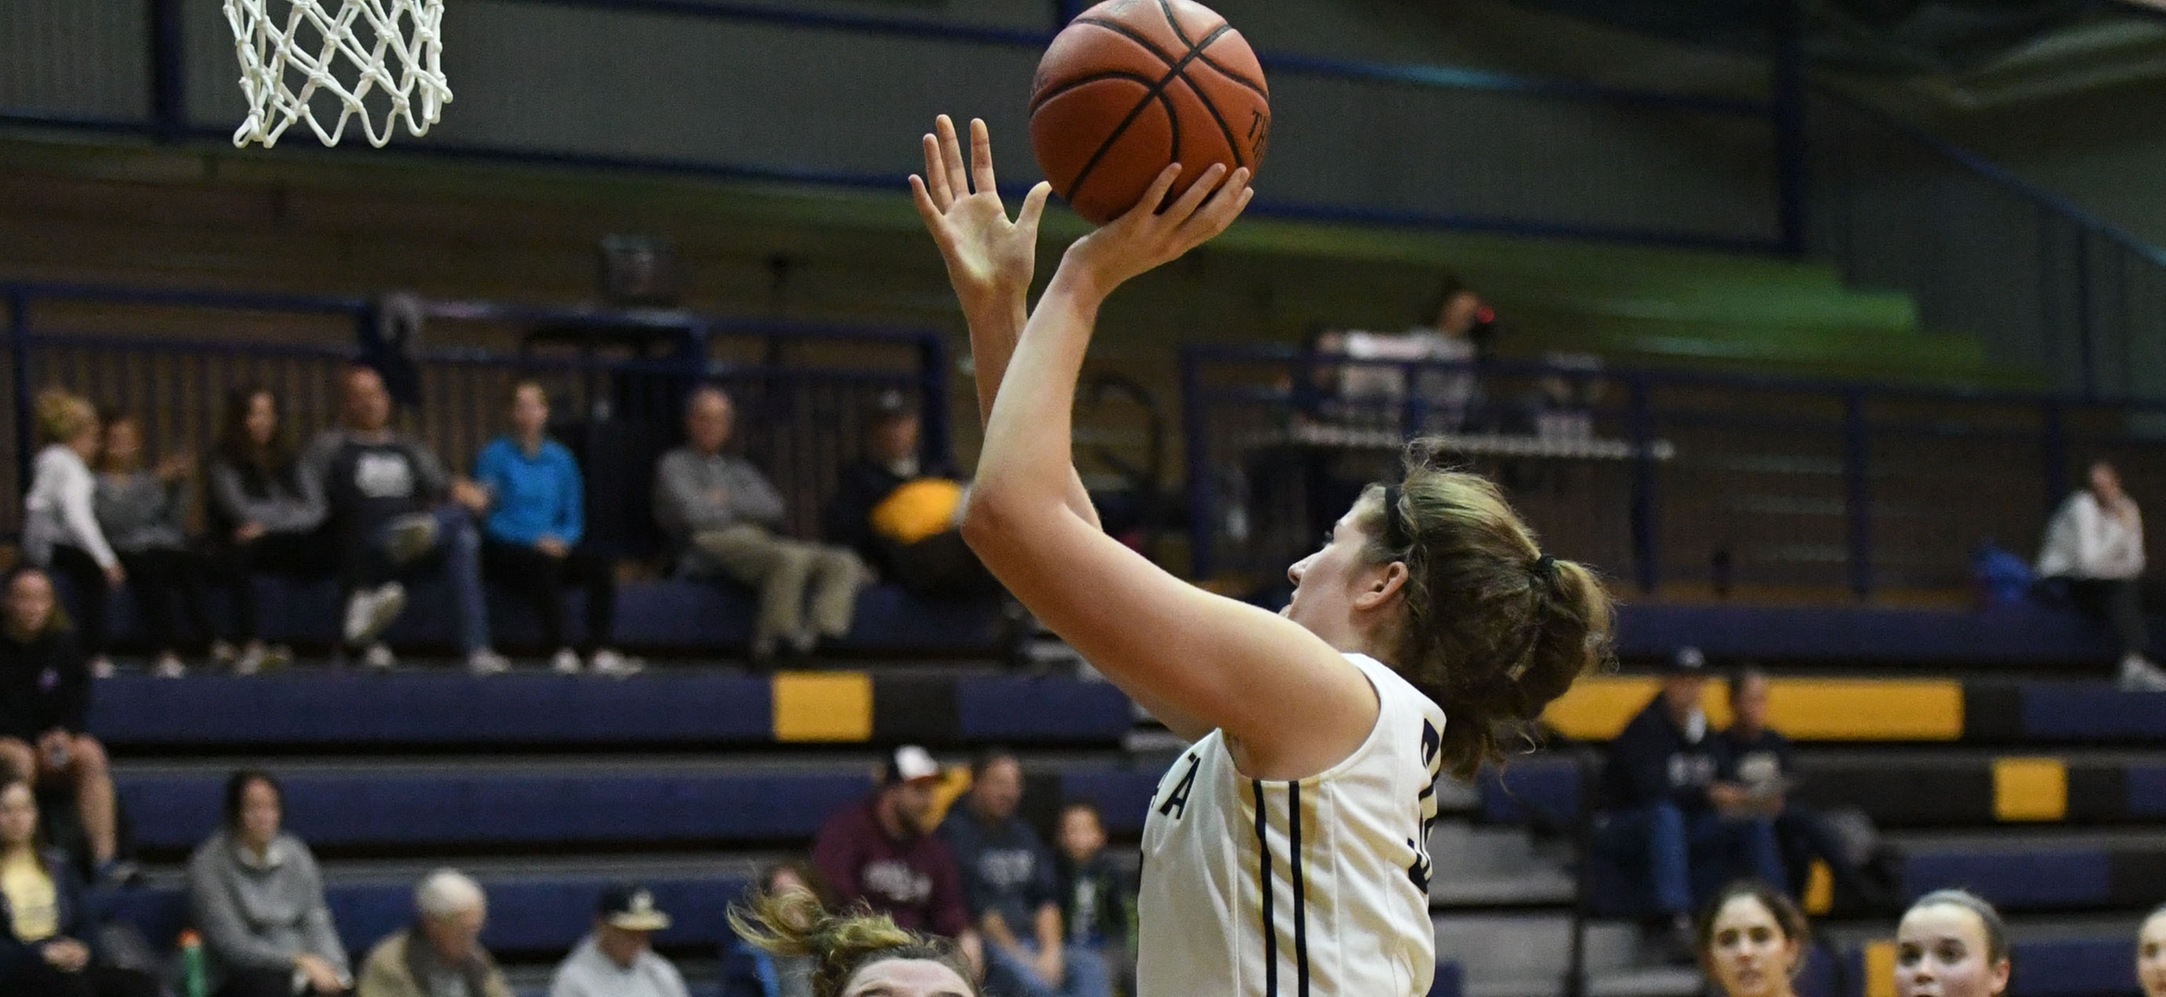 Gracie Stauffer had her fifth double double of the season as she tallied 18 points and 14 rebounds to go along with three blocks and two steals.